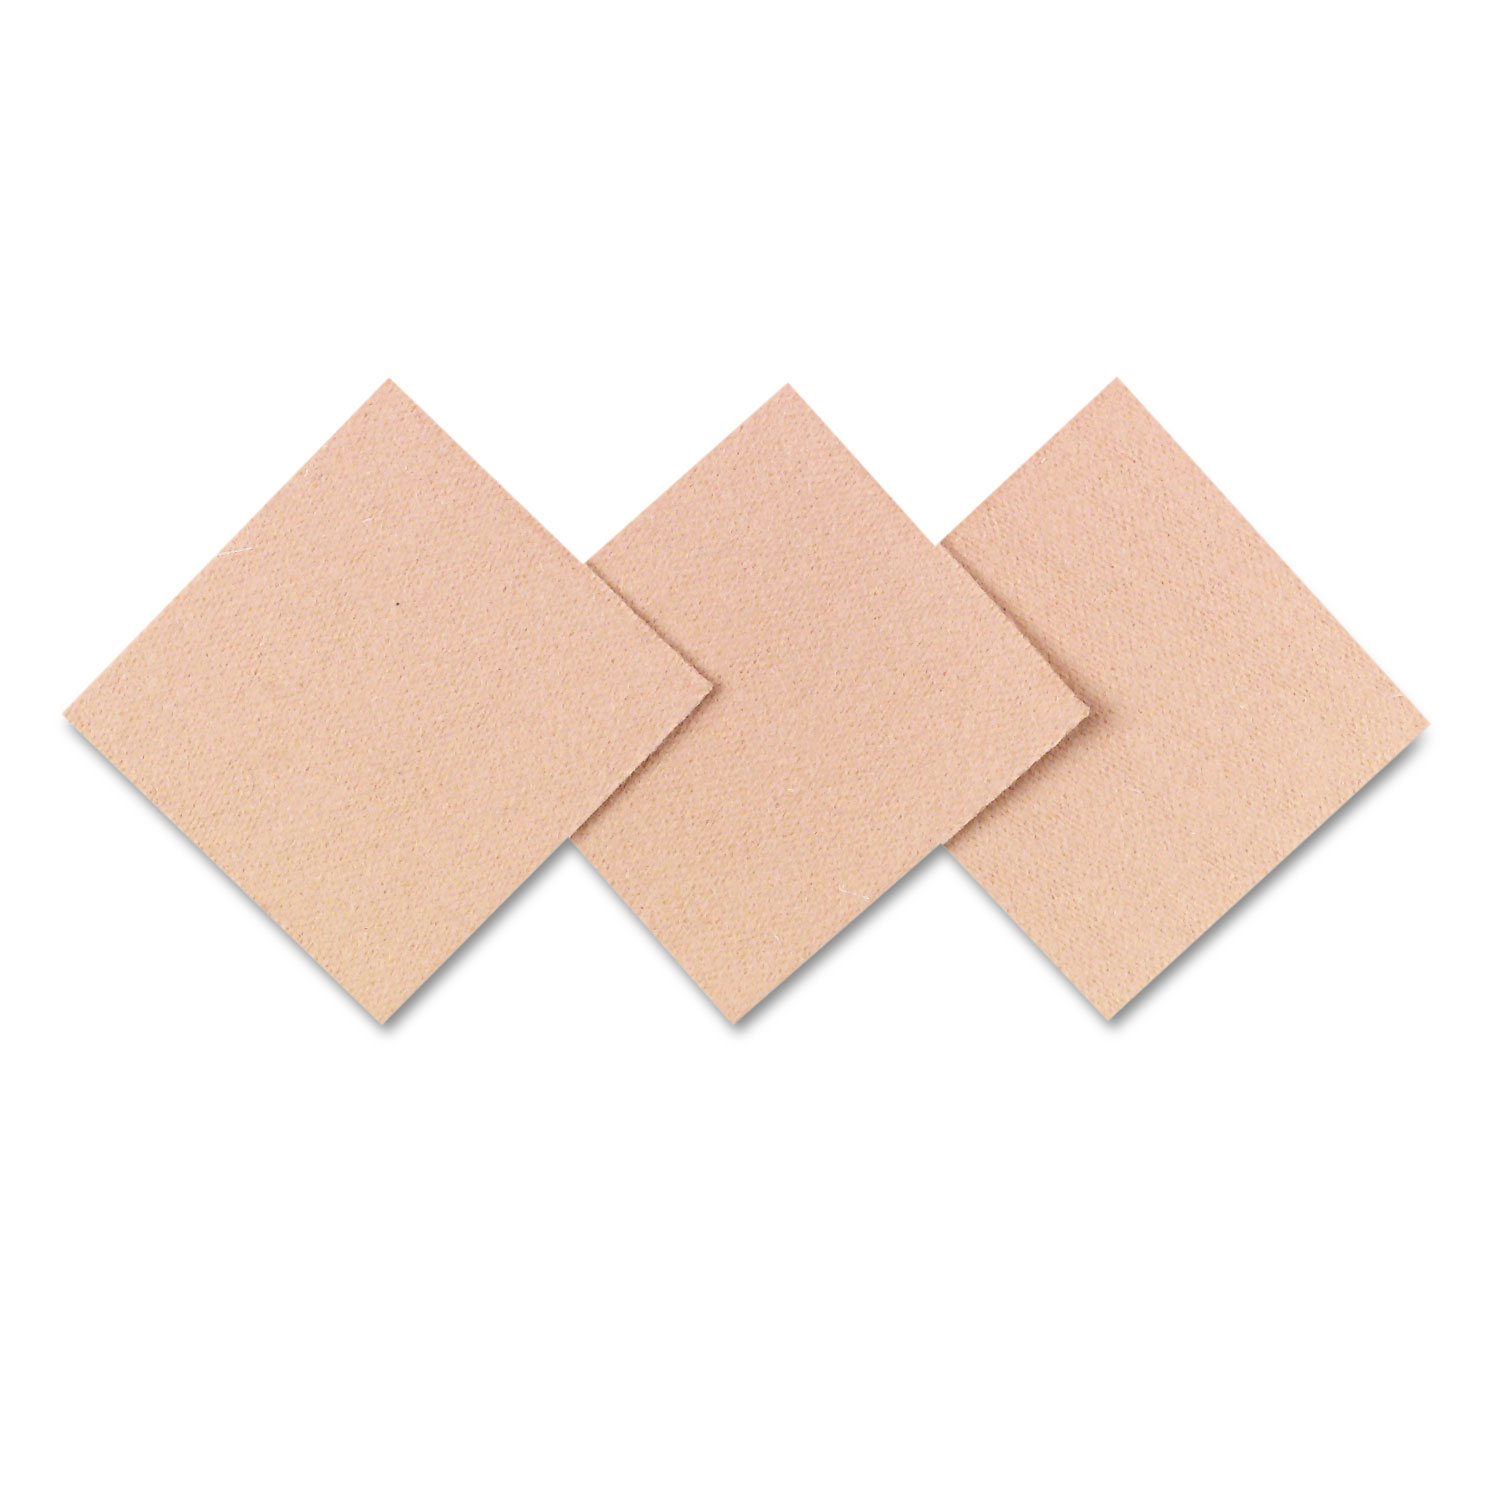 First Aid Only FAE-6013 Moleskin/Blister Protection, 2” Squares, 10/Box - image 3 of 3